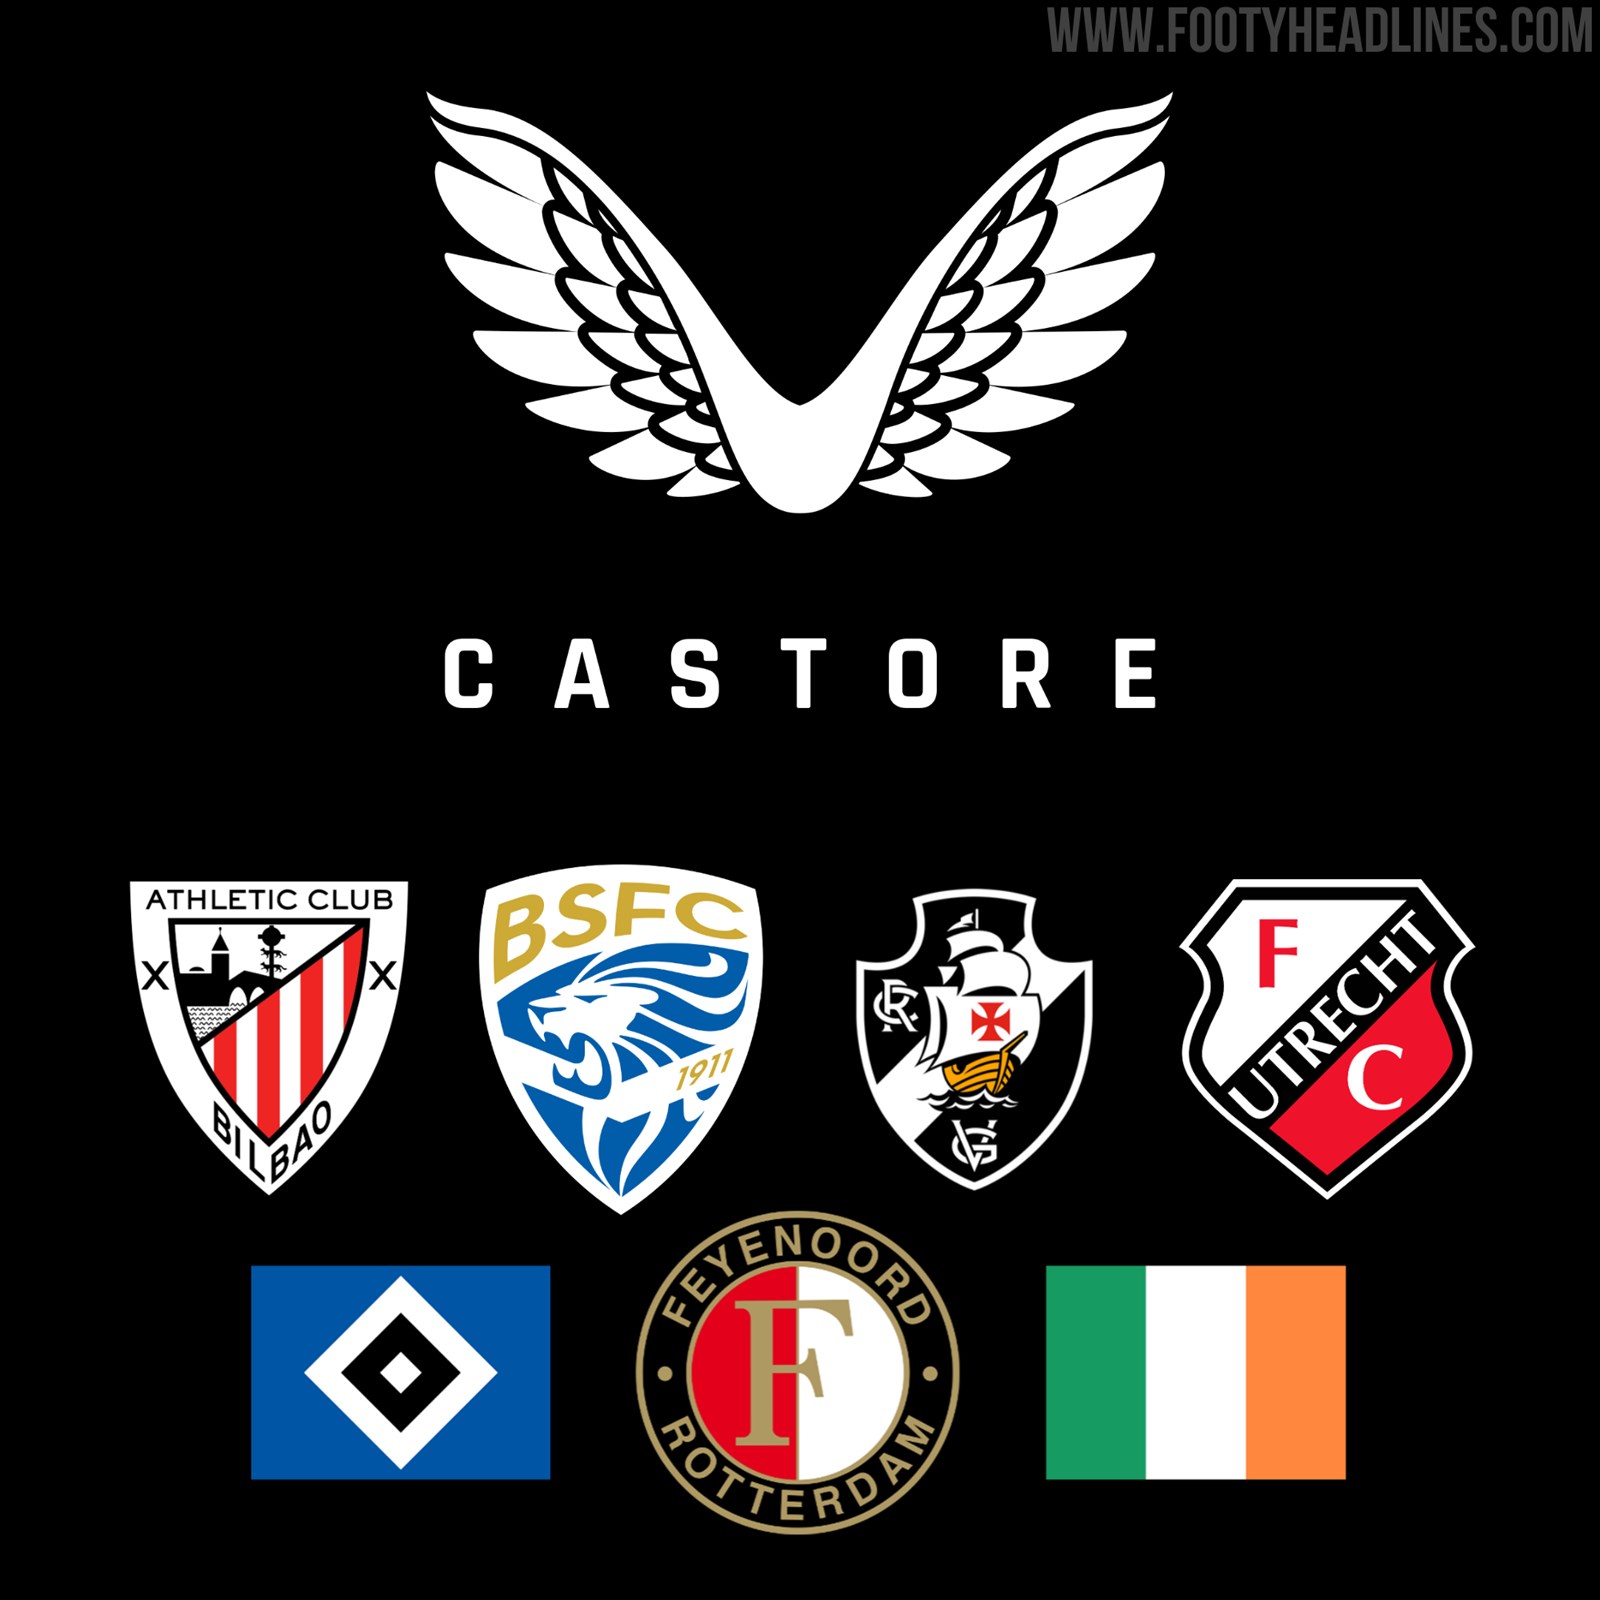 Castore Multi-Year Kit Partnership With Athletic Club